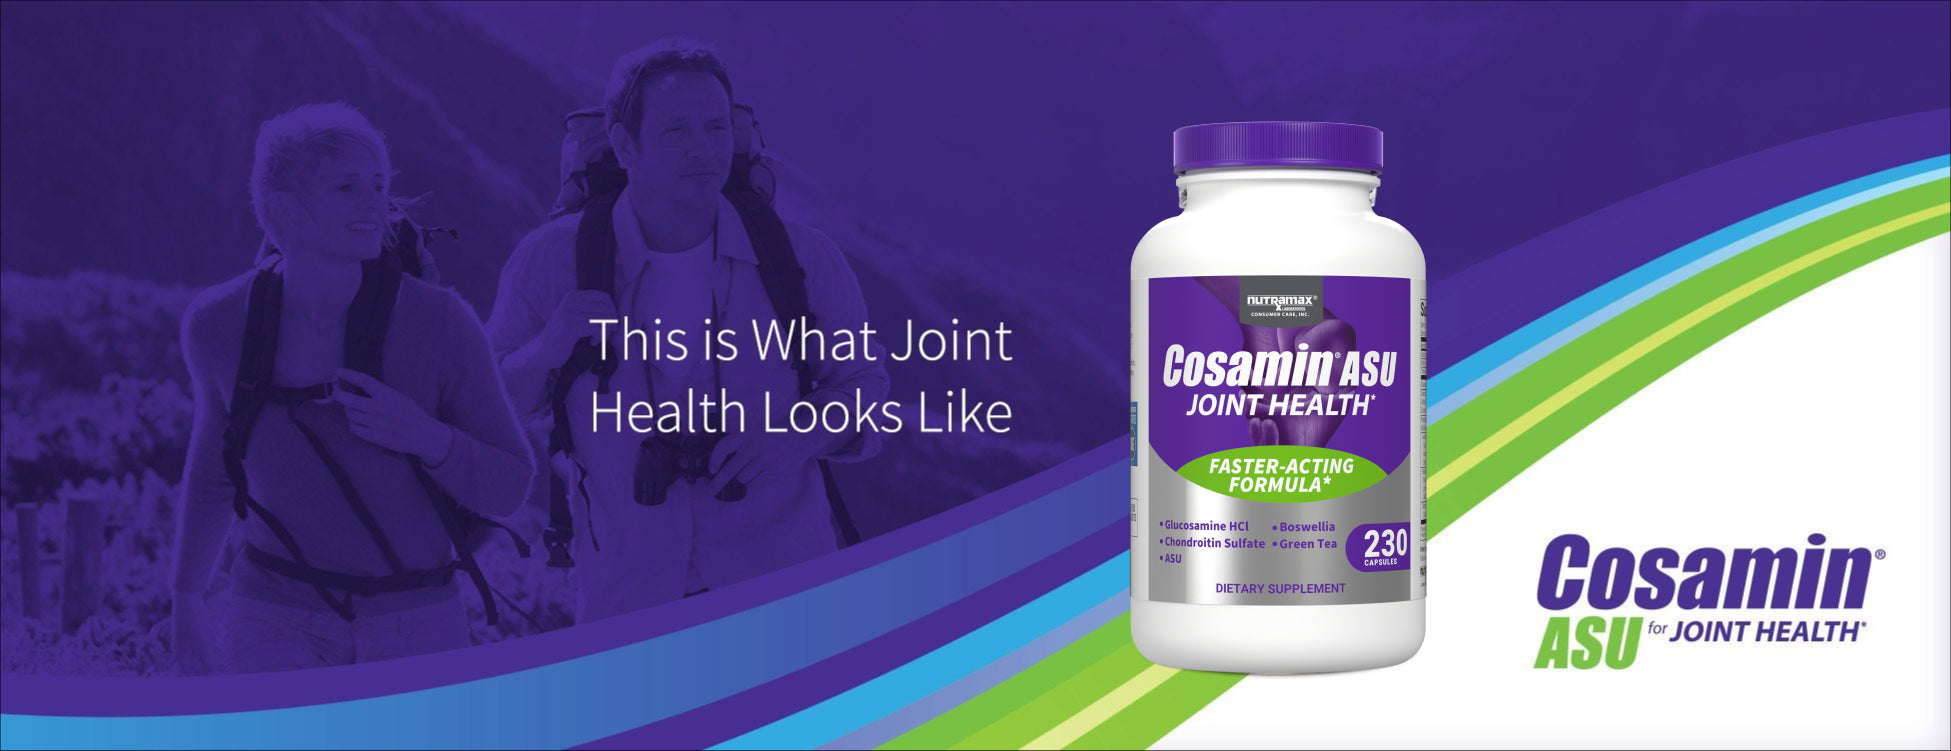 Cosamin is what Joint Health looks like.